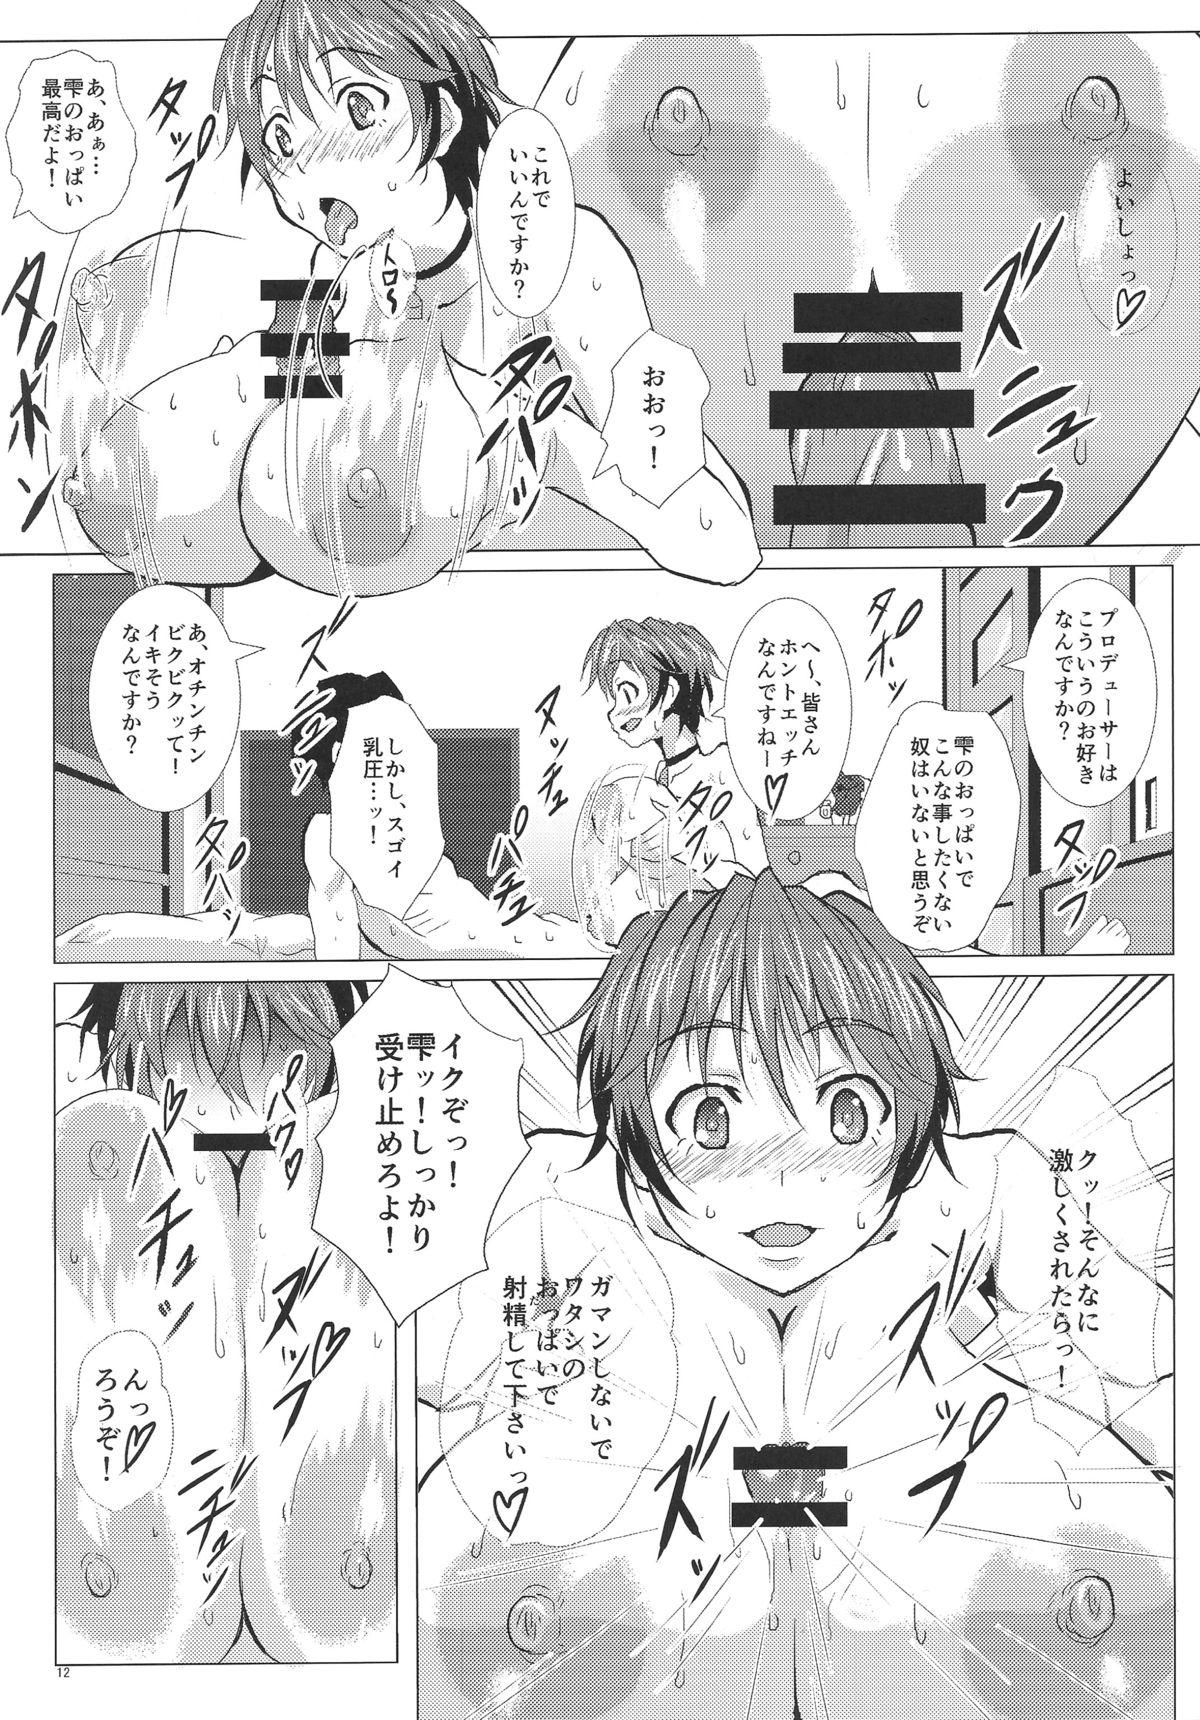 Buttfucking THE PAIDOLM@STER - The idolmaster Missionary - Page 11